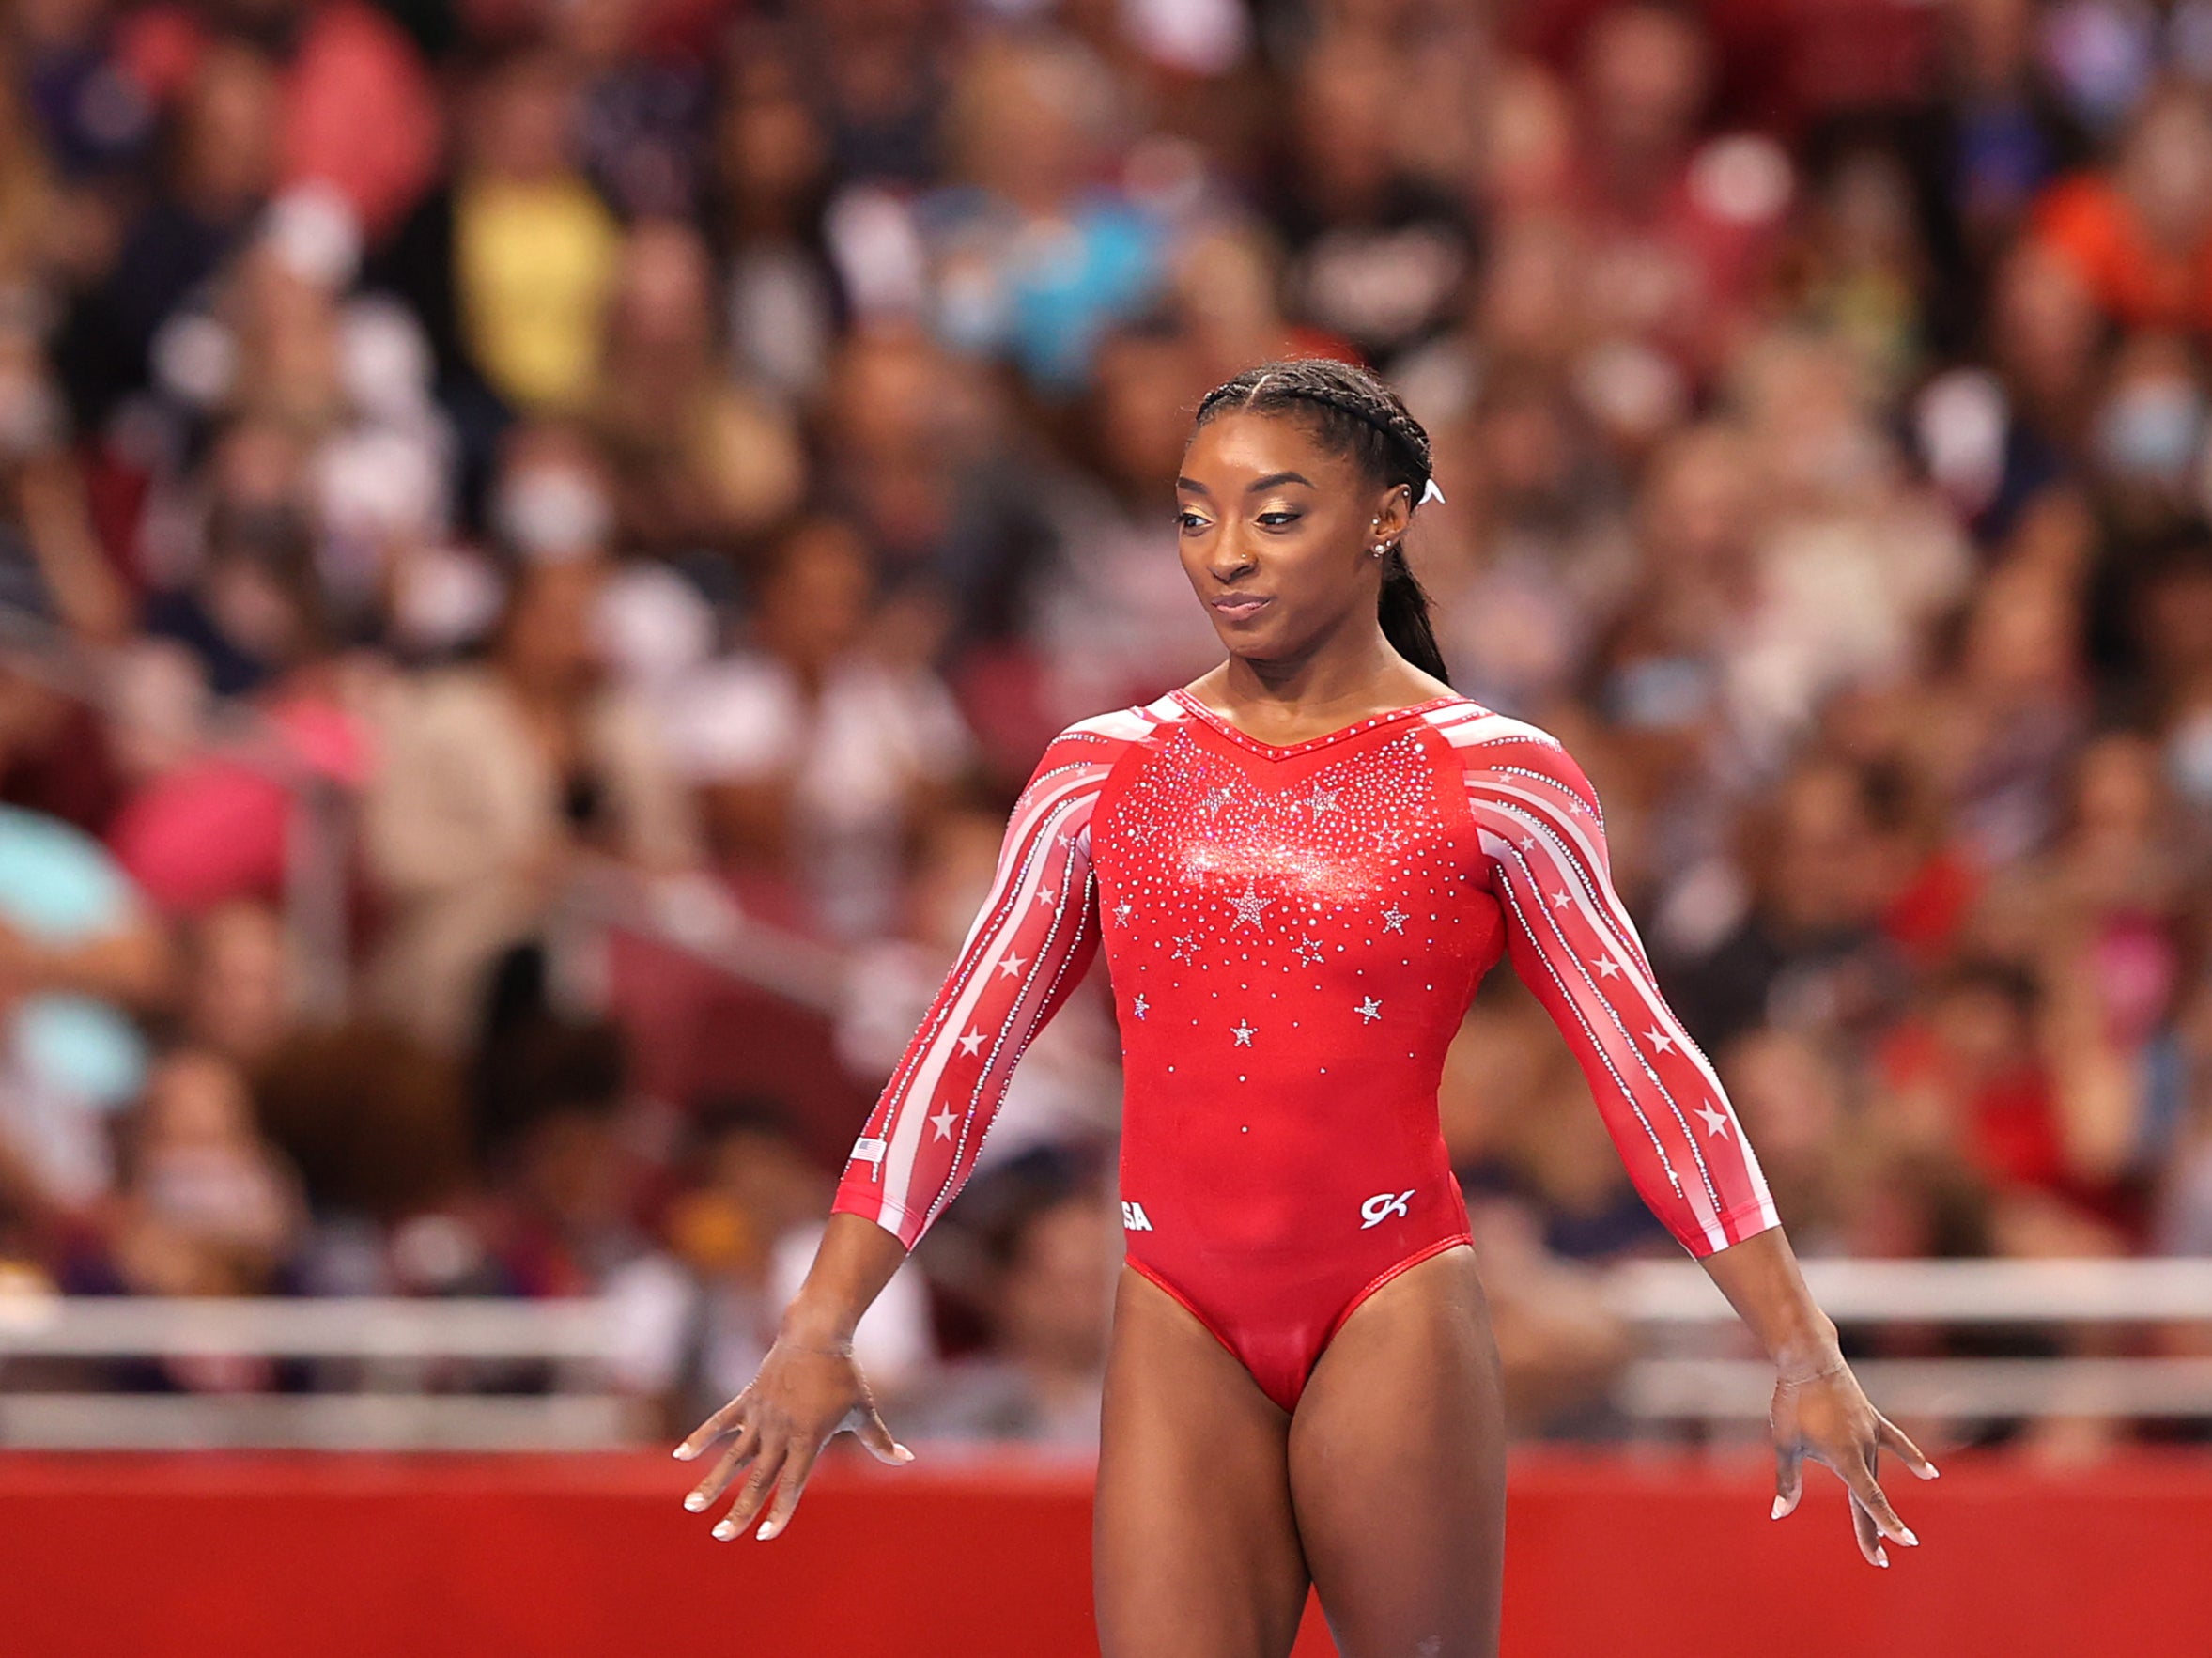 Simone Biles competes in the floor exercise during the Women’s competition of the 2021 US Gymnastics Olympic Trials at America’s Center on 27 June, 2021 in St Louis, Missouri. Ms Biles has spoken out about the trauma she faced after being sexually abused by Larry Nassar.